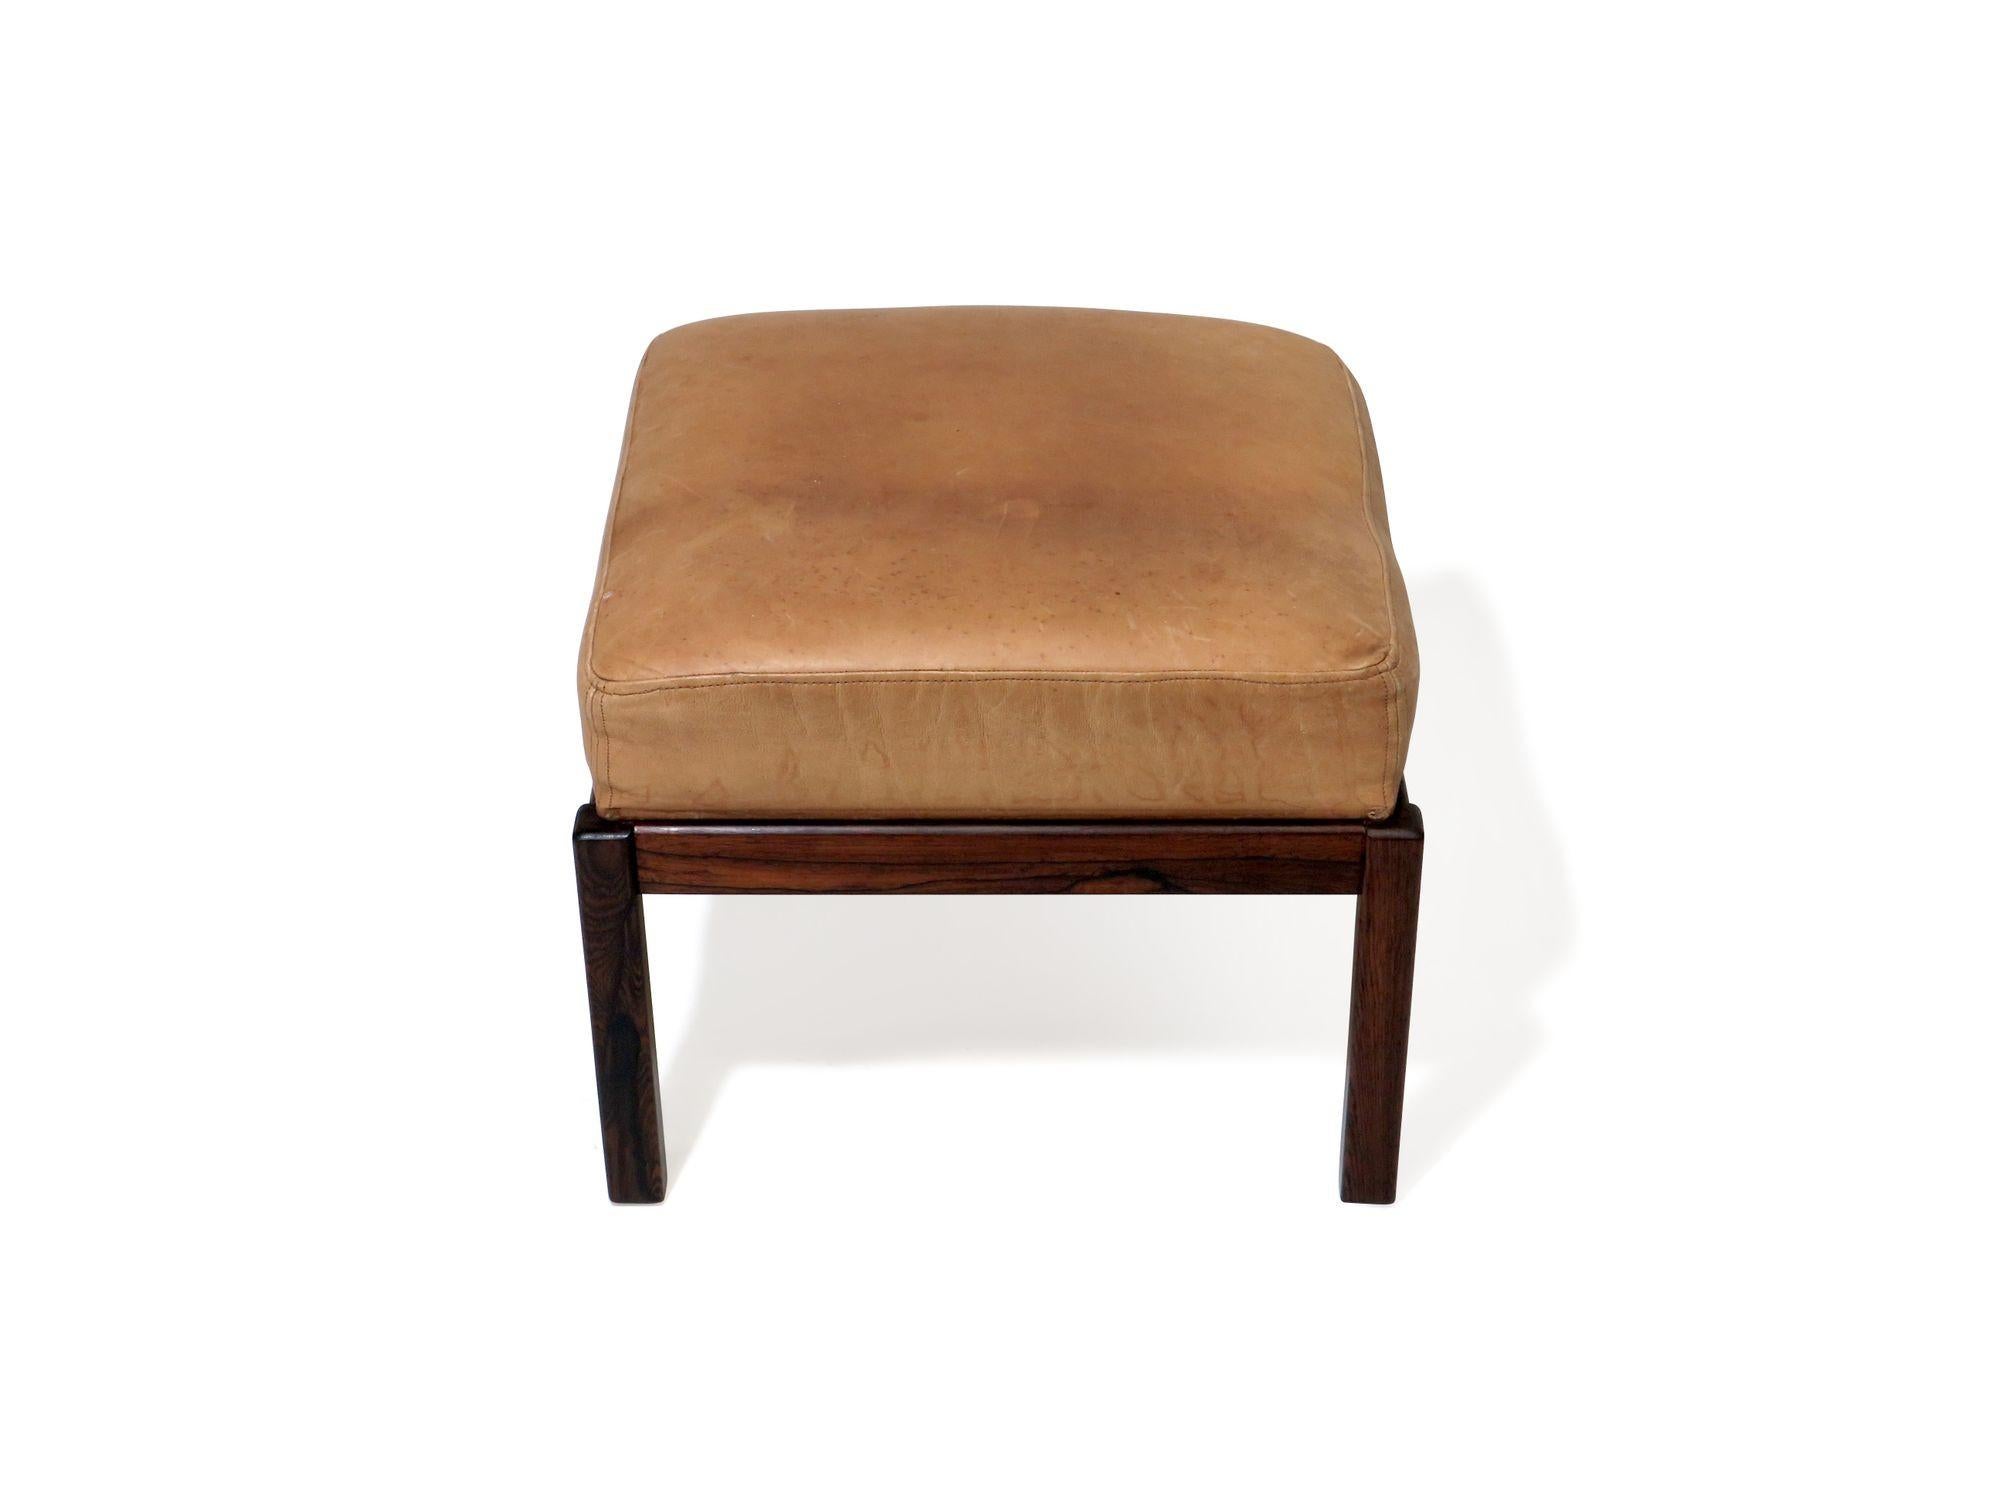 20th Century Rosewood Ottoman Bench in Leather